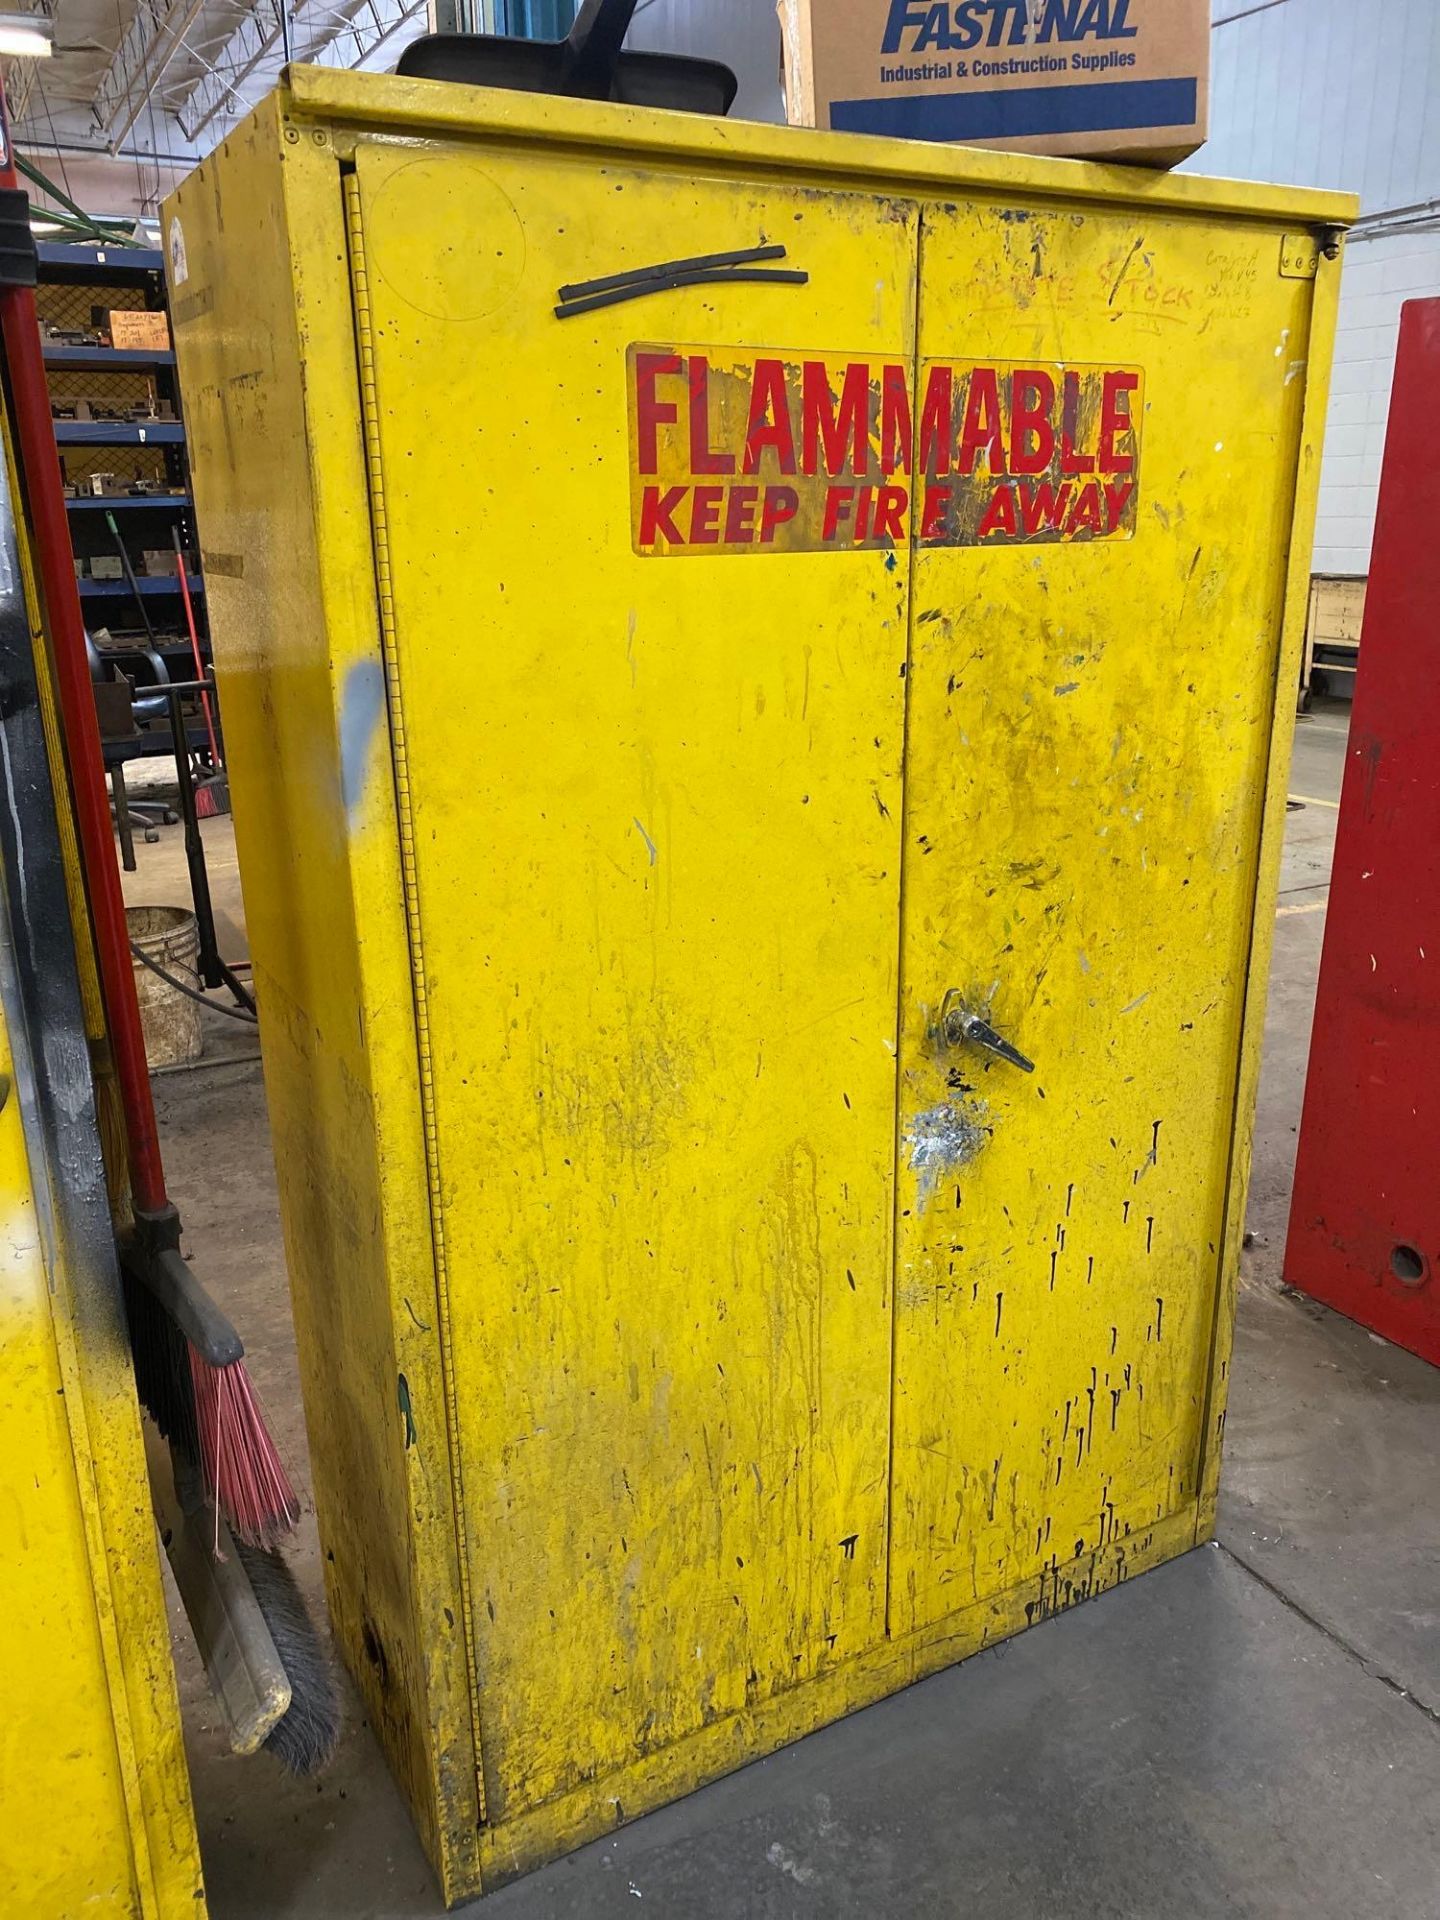 Justrite 60 Gallon Capacity Flammable Storage Cabinet - Image 4 of 5